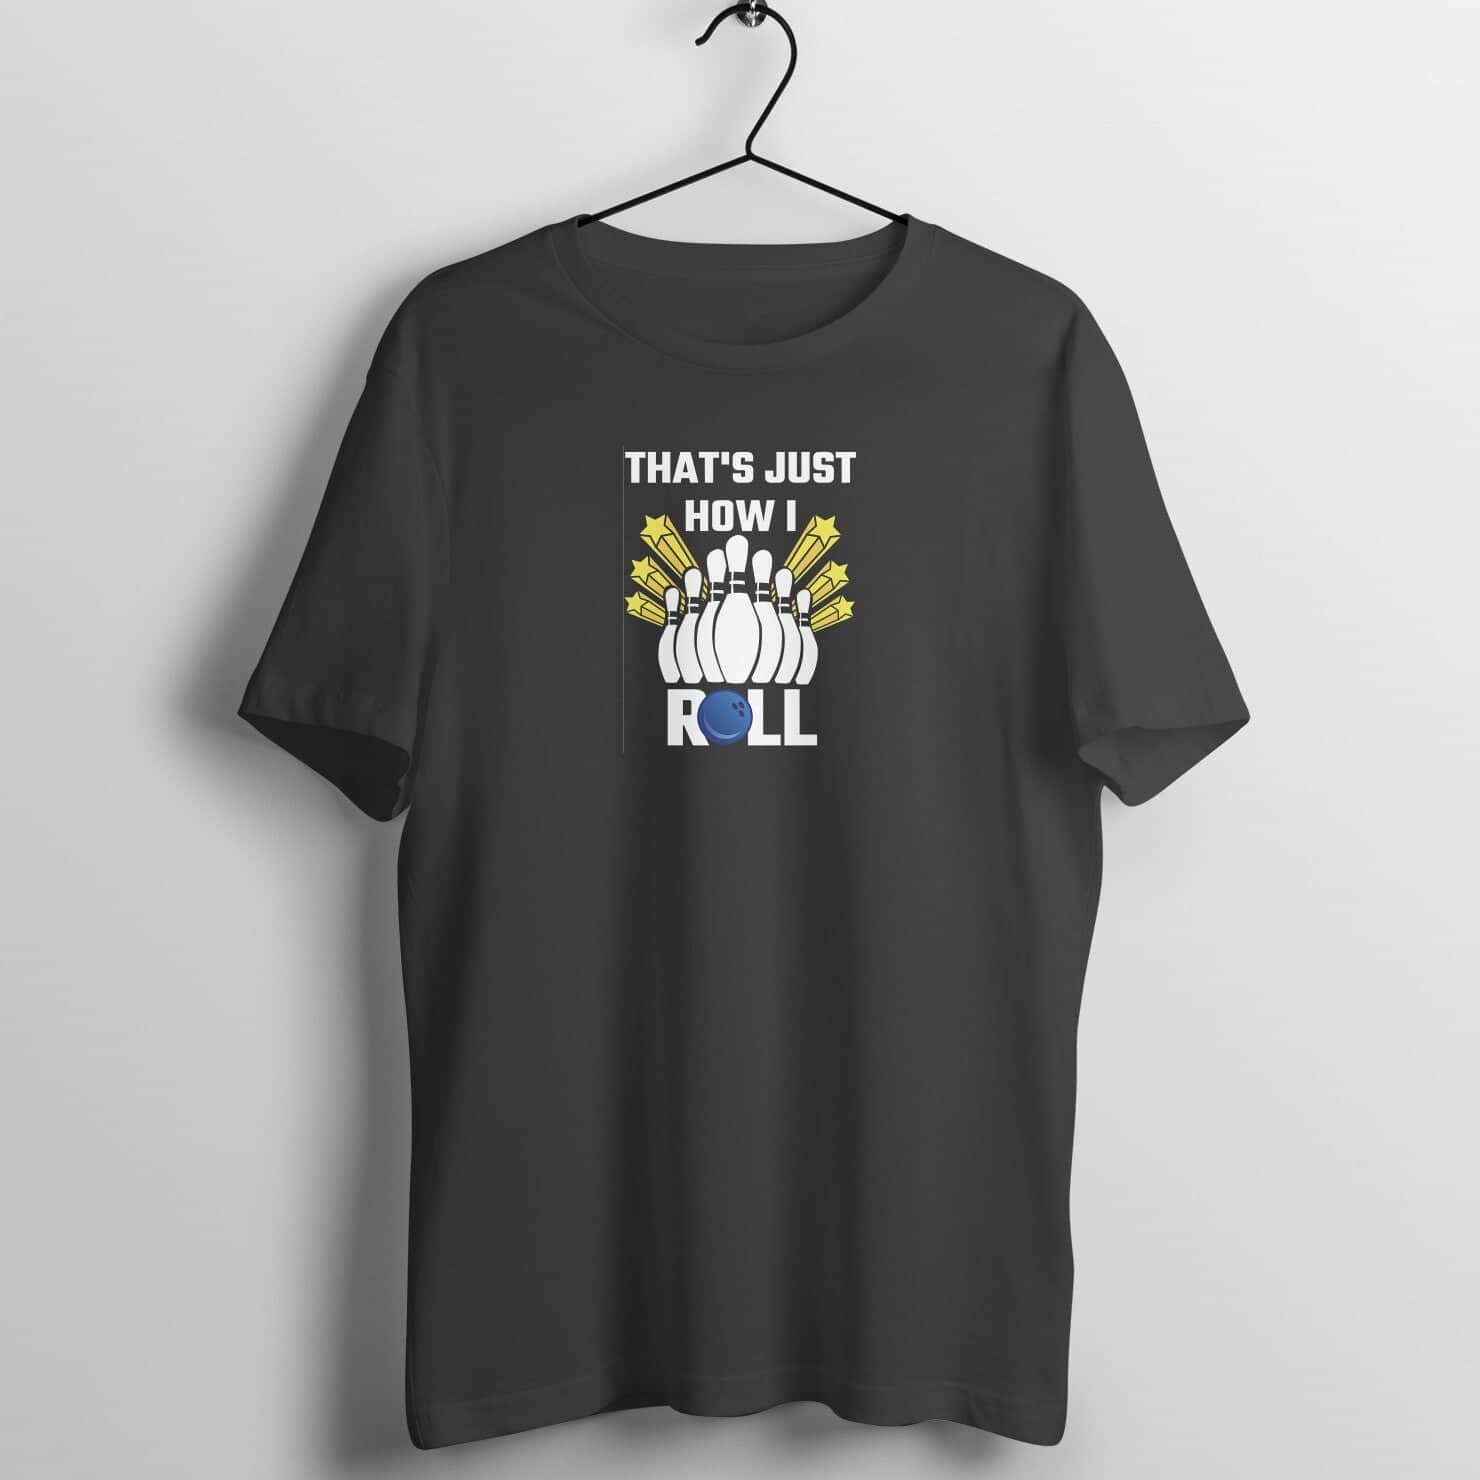 That's How I Roll Funny Black Bowling T Shirt for Men and Women freeshipping - Catch My Drift India